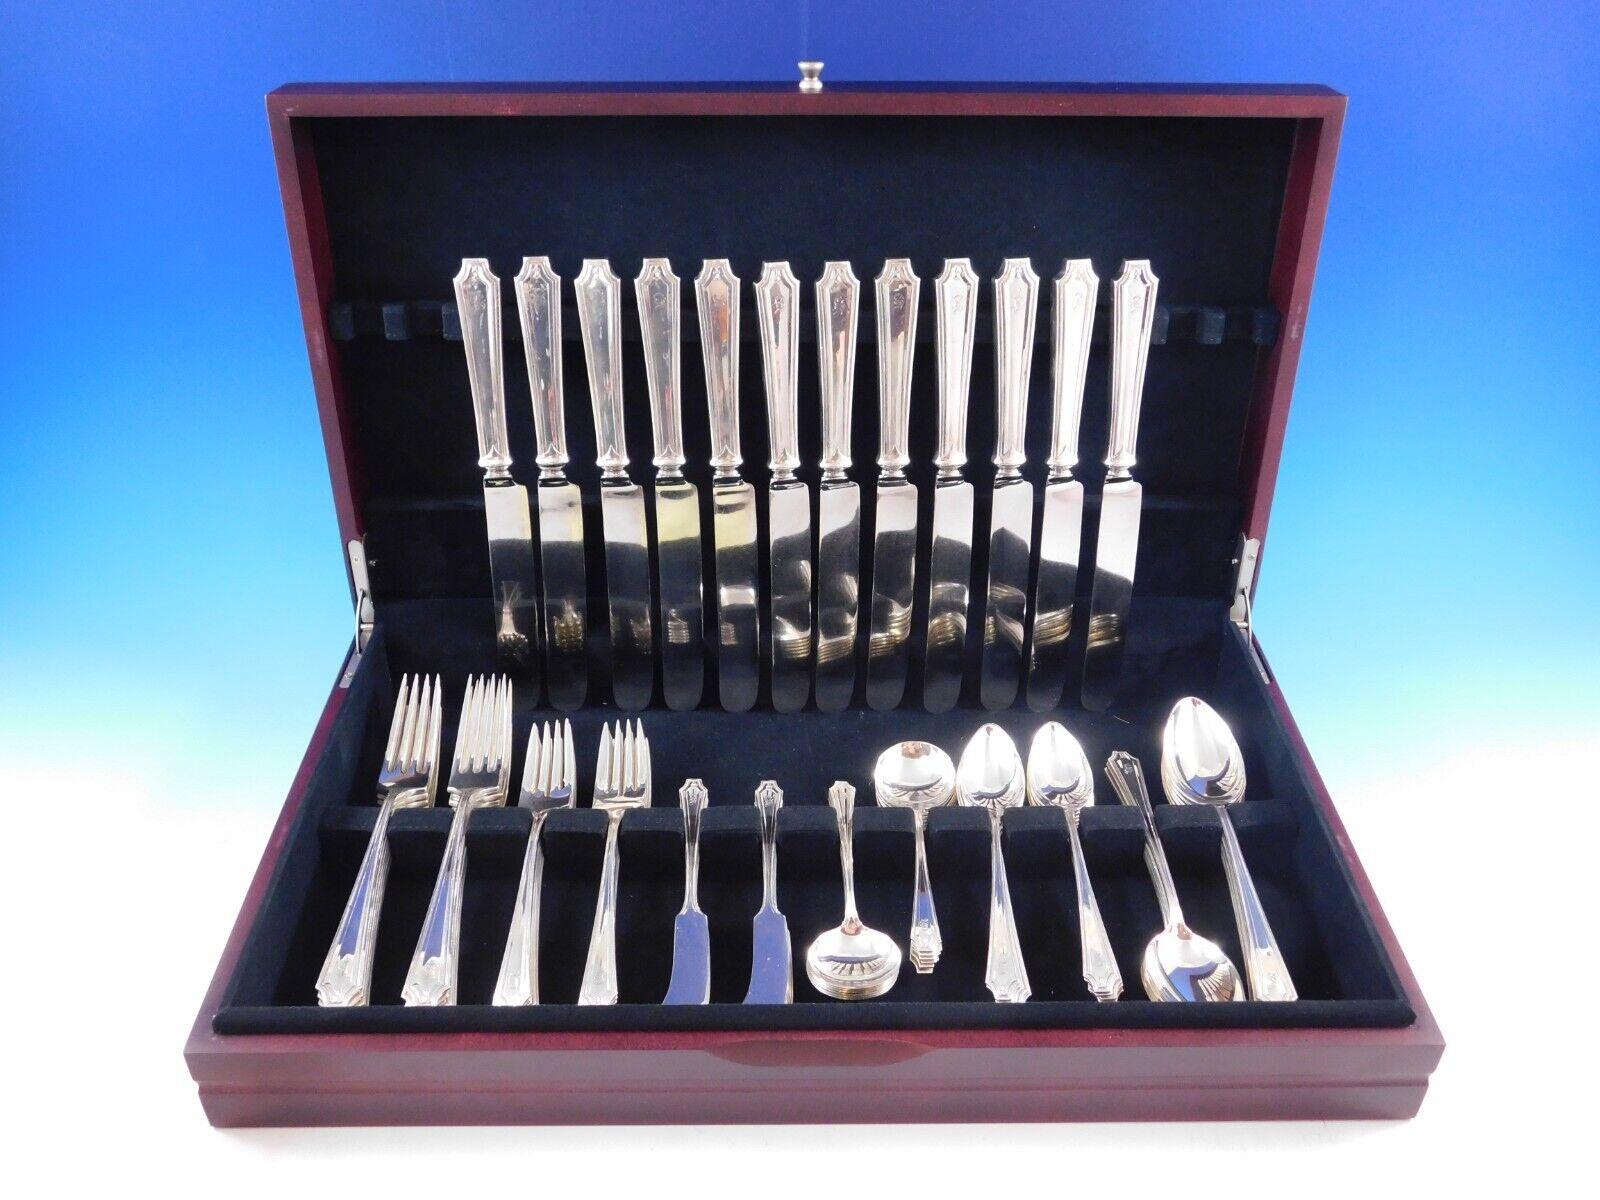 Dinner Size King Albert by Whiting c1919 sterling silver Flatware set, 83 pieces. This set includes:

12 Dinner Size Knives, 9 5/8